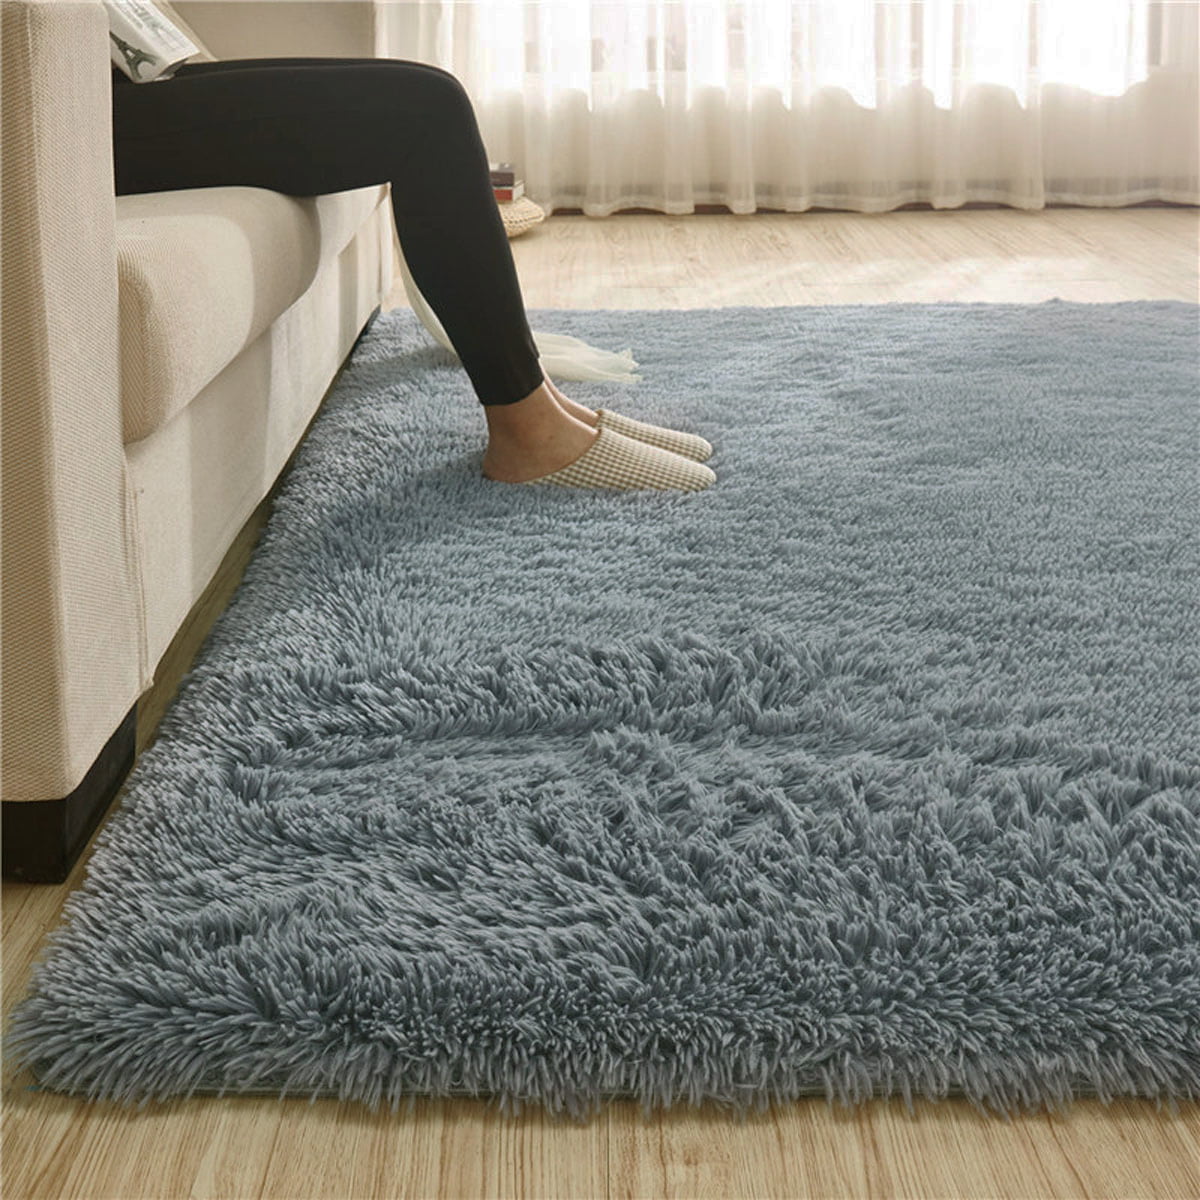 Tinyboy-hbq Area Rugs Large for Living Room Modern Plush Indoor Carpet Soft and Fluffy Bedroom Rug Anti-Slip and Anti-Fall Children's Play Mat Suitable for Home 185*185cm, Black grey